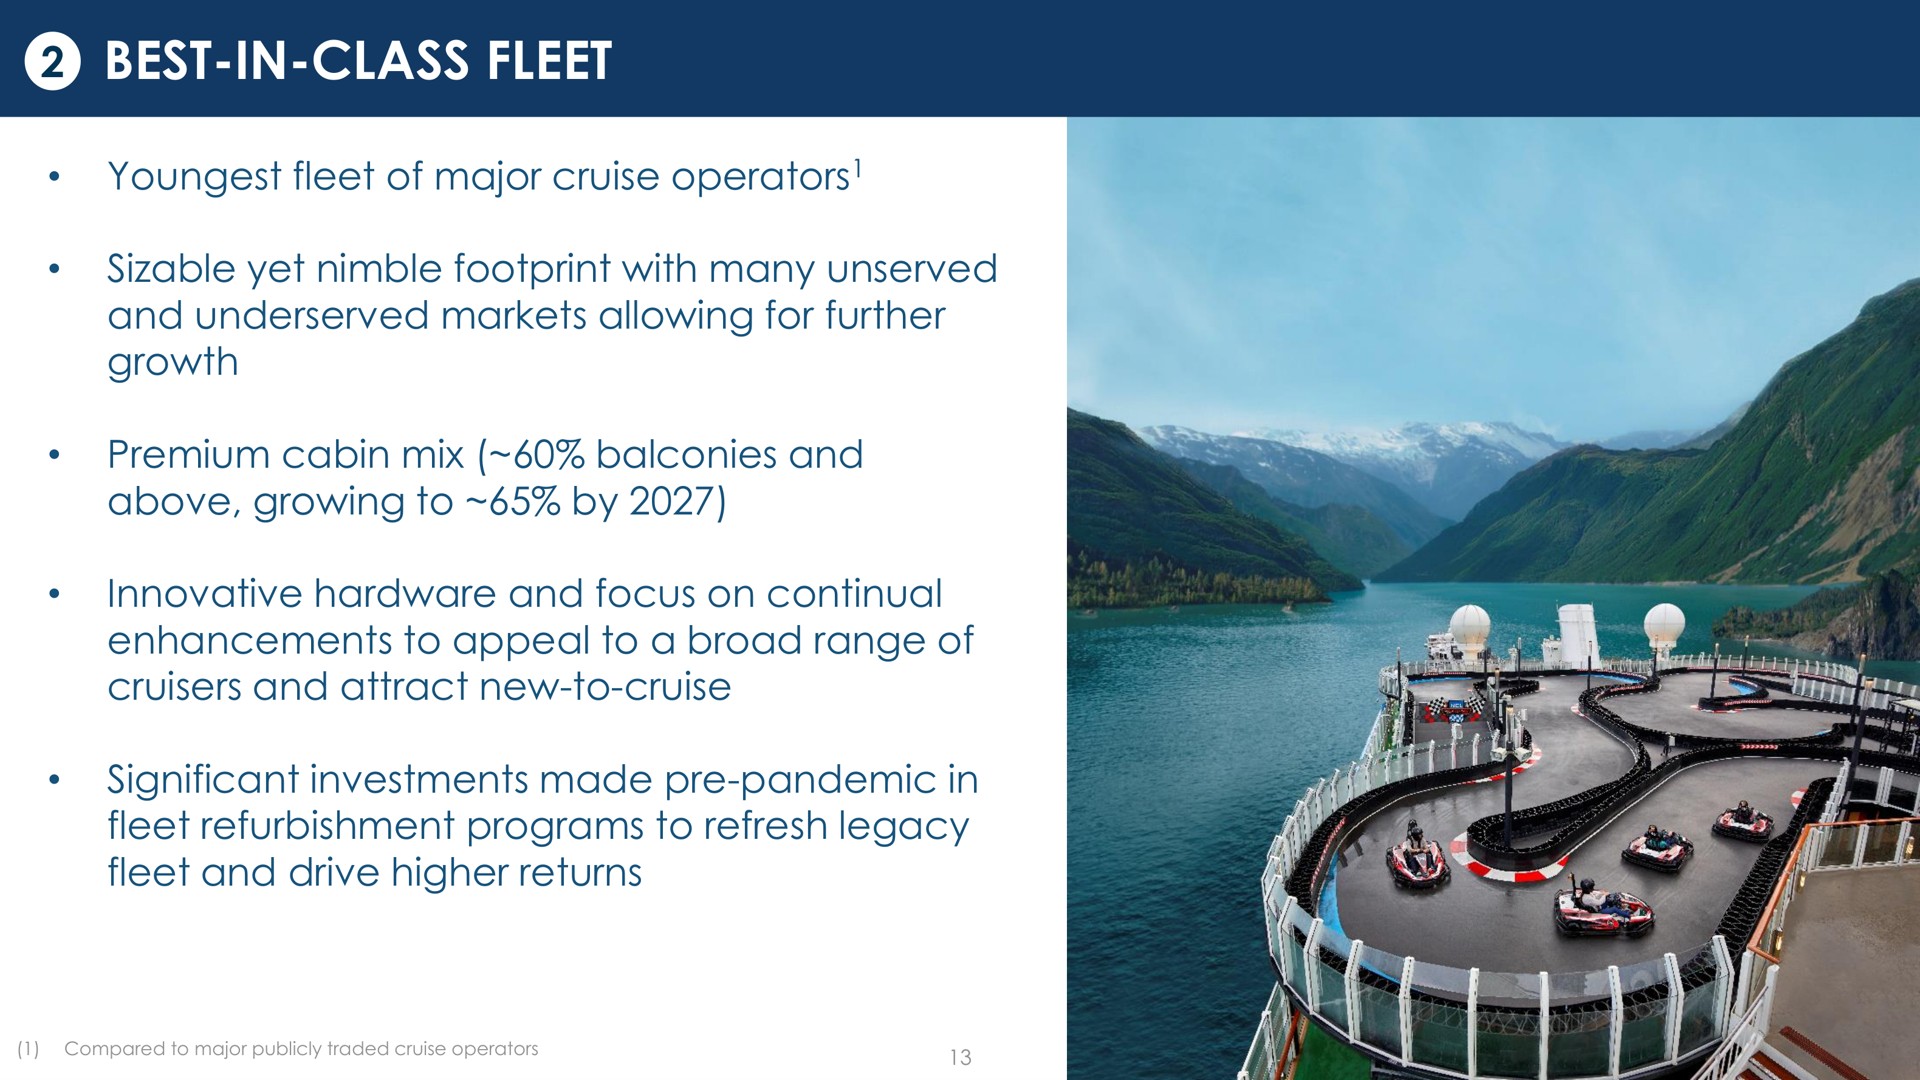 best in class fleet fleet of major cruise operators sizable yet nimble footprint with many unserved and markets allowing for further growth premium cabin mix balconies and above growing to by innovative hardware and focus on continual enhancements to appeal to a broad range of cruisers and attract new to cruise significant investments made pandemic in fleet refurbishment programs to refresh legacy fleet and drive higher returns | Norwegian Cruise Line